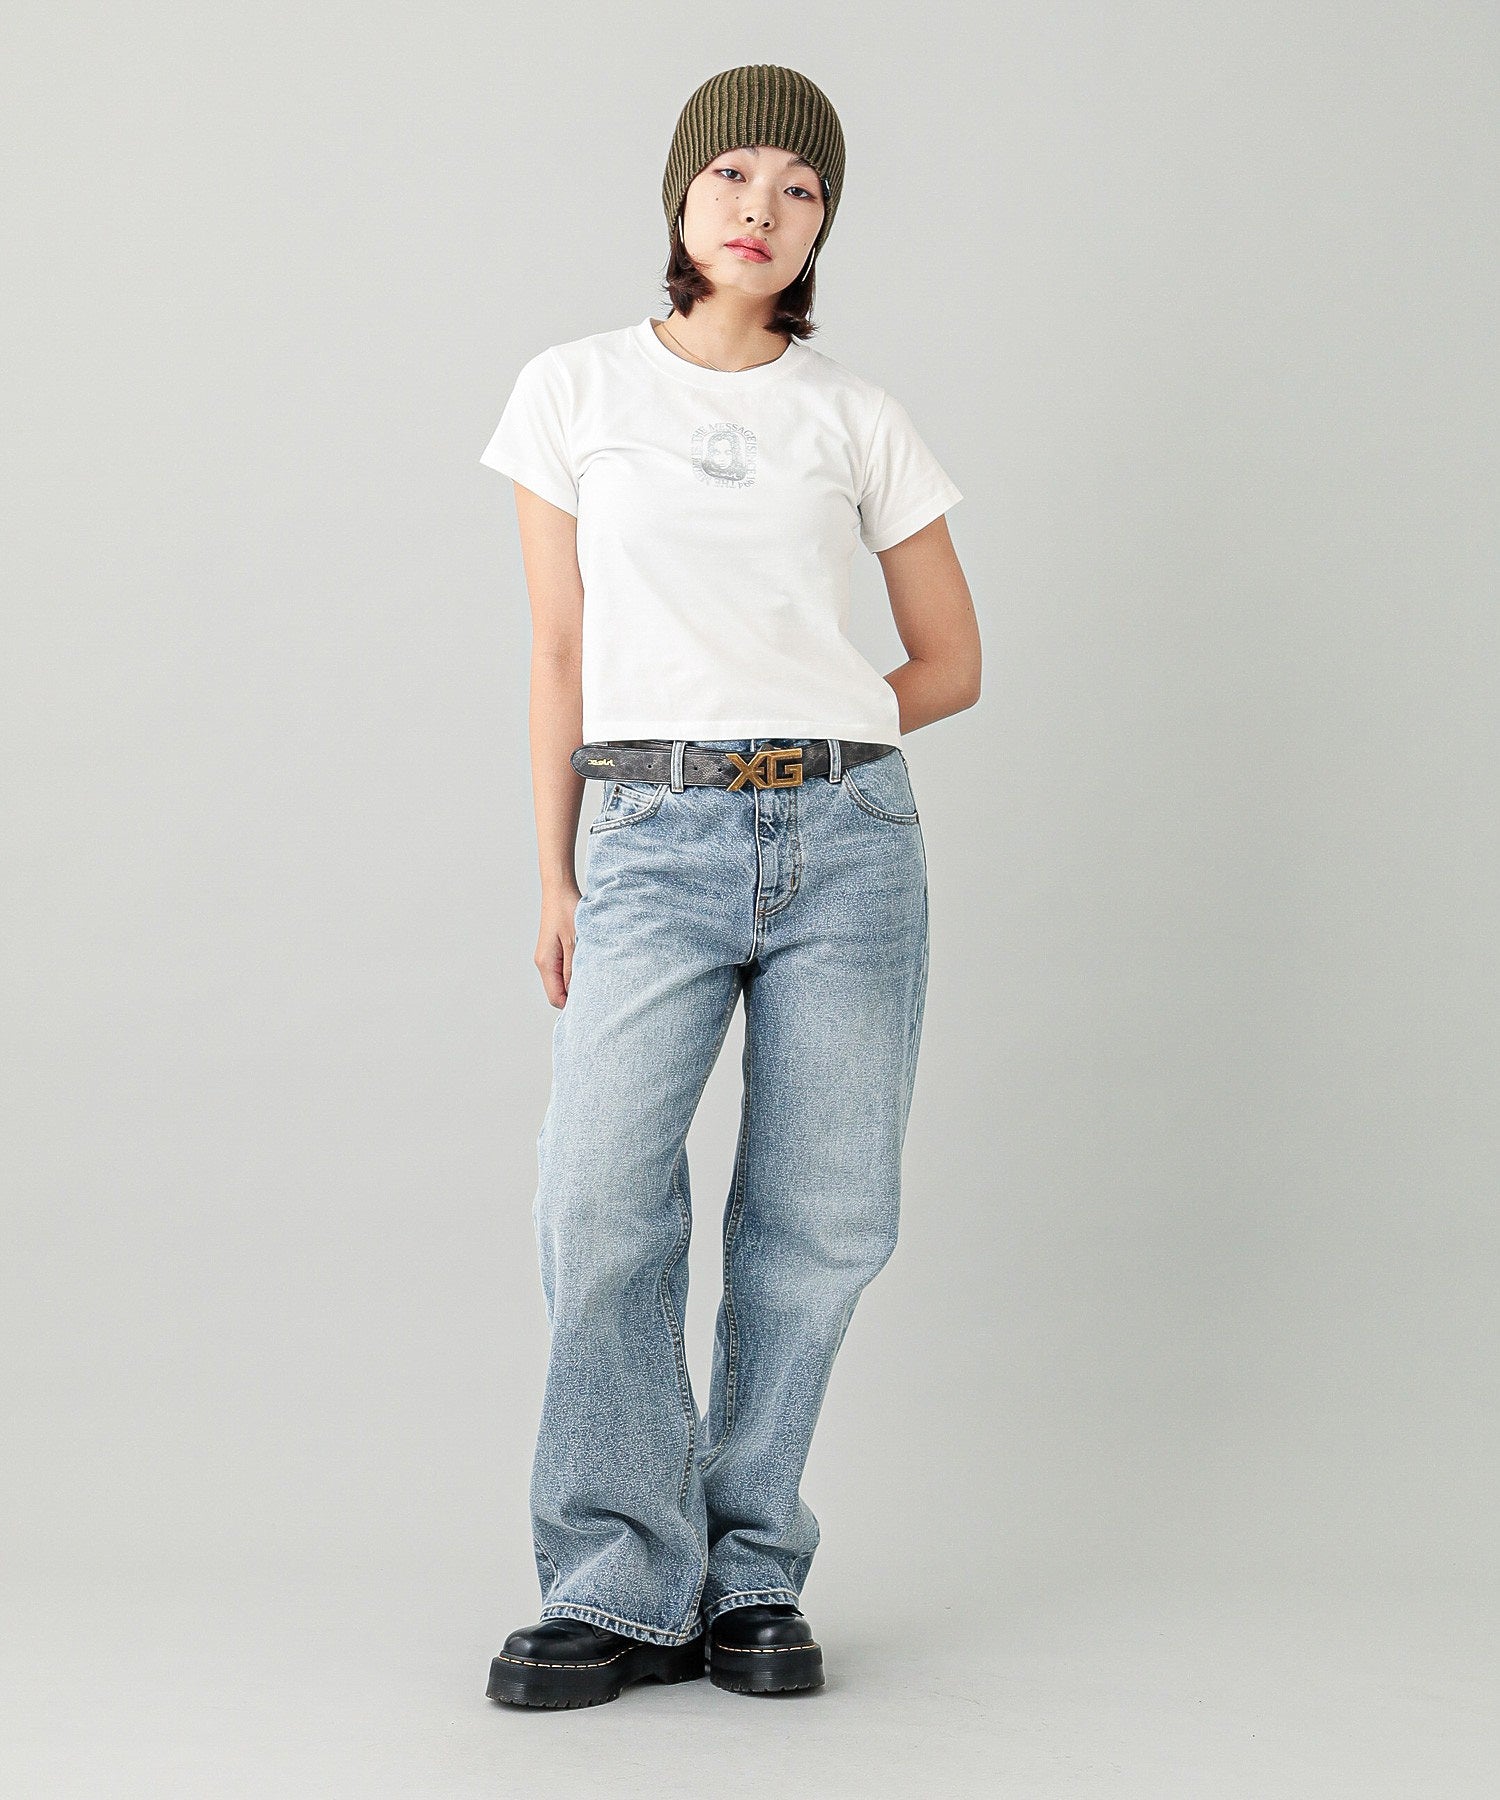 FACE ROUNDED SQUARE S/S BABY TEE